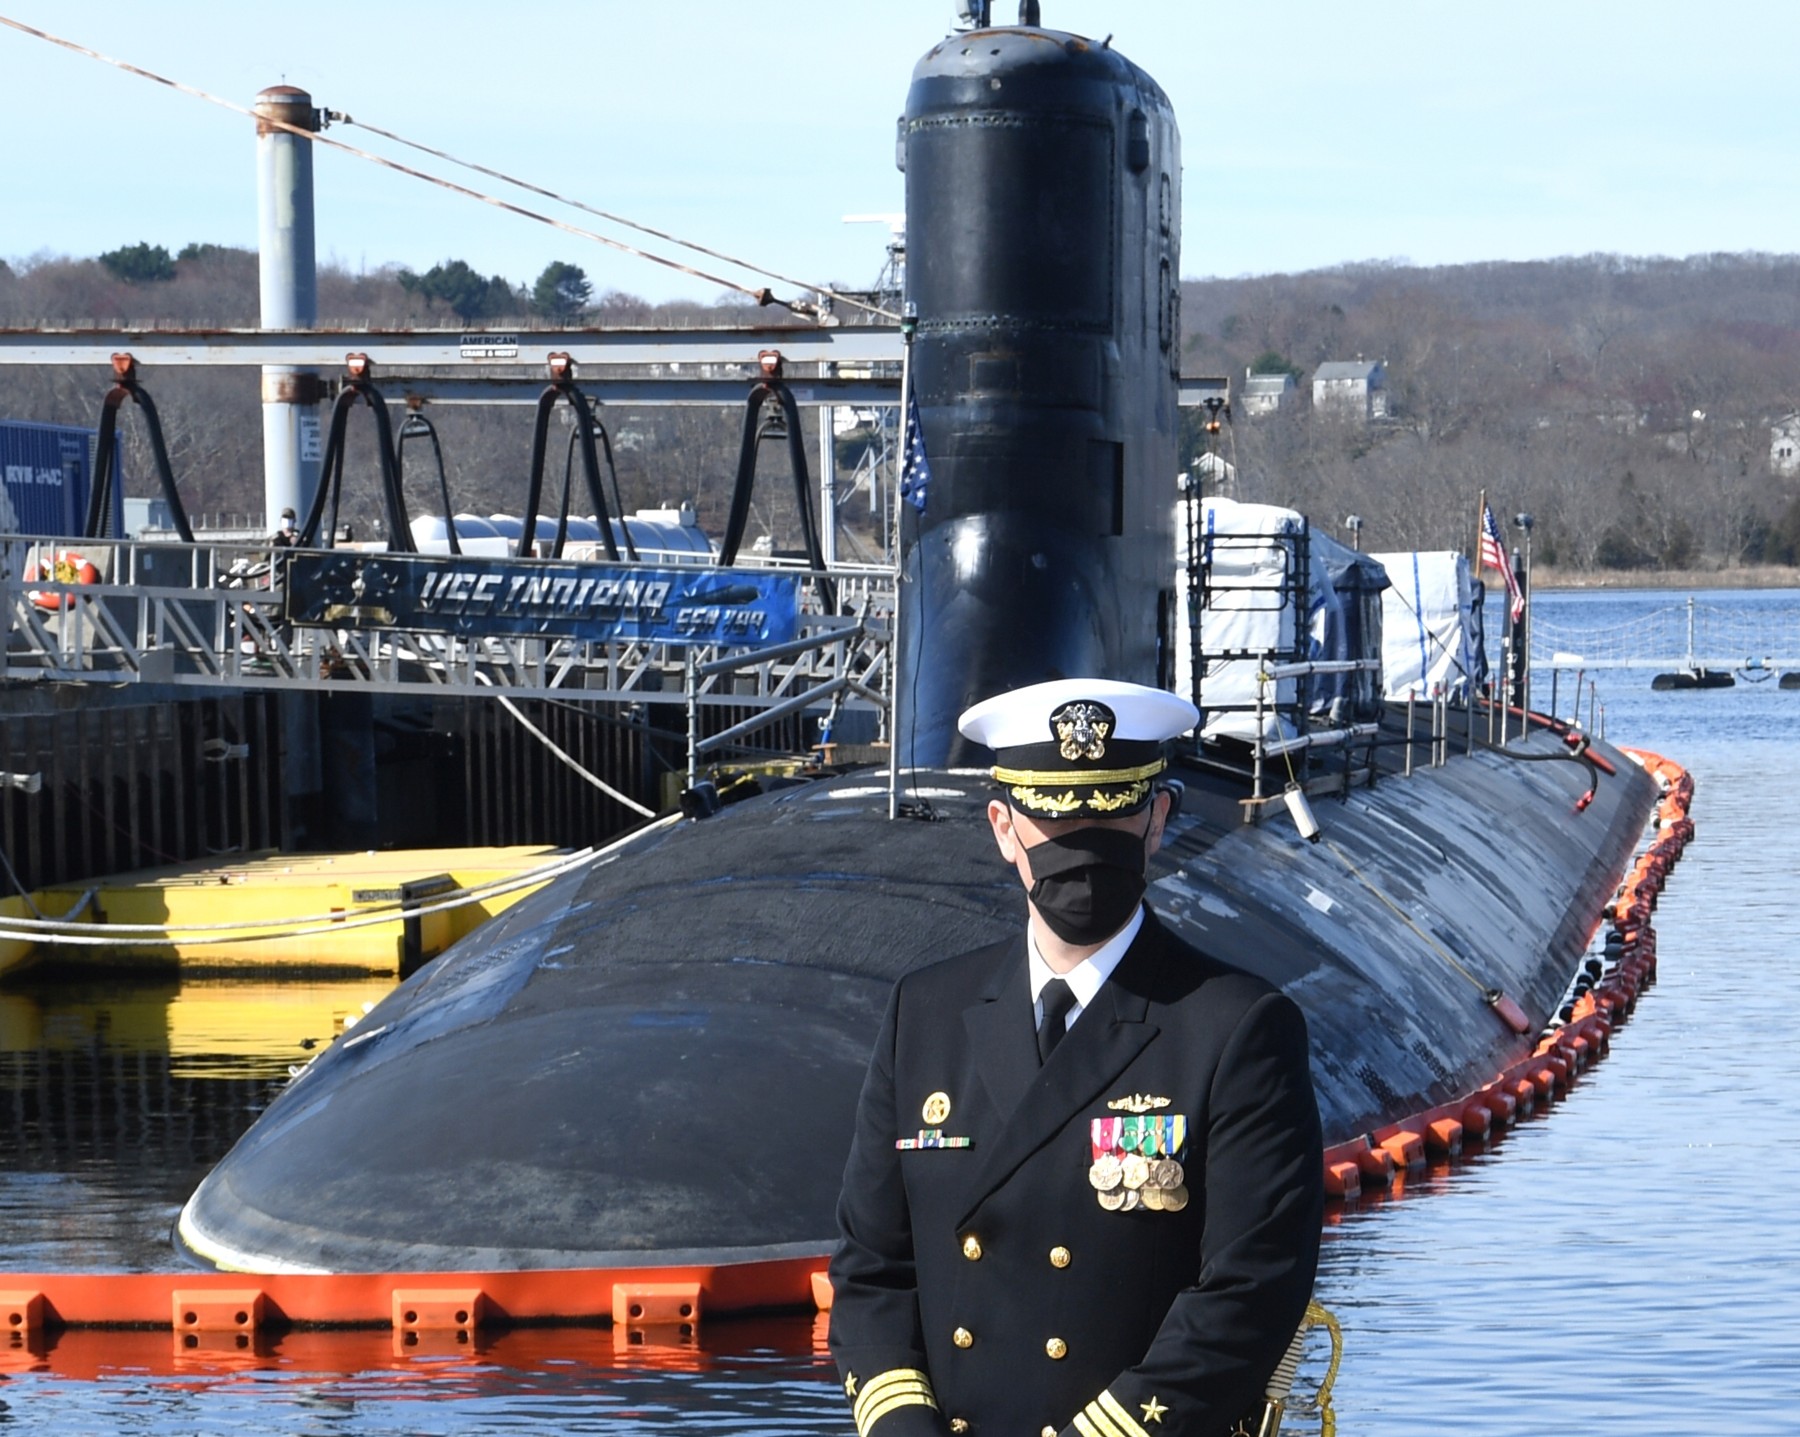 ssn-789 uss indiana virginia class attack submarine us navy 63 change of command groton